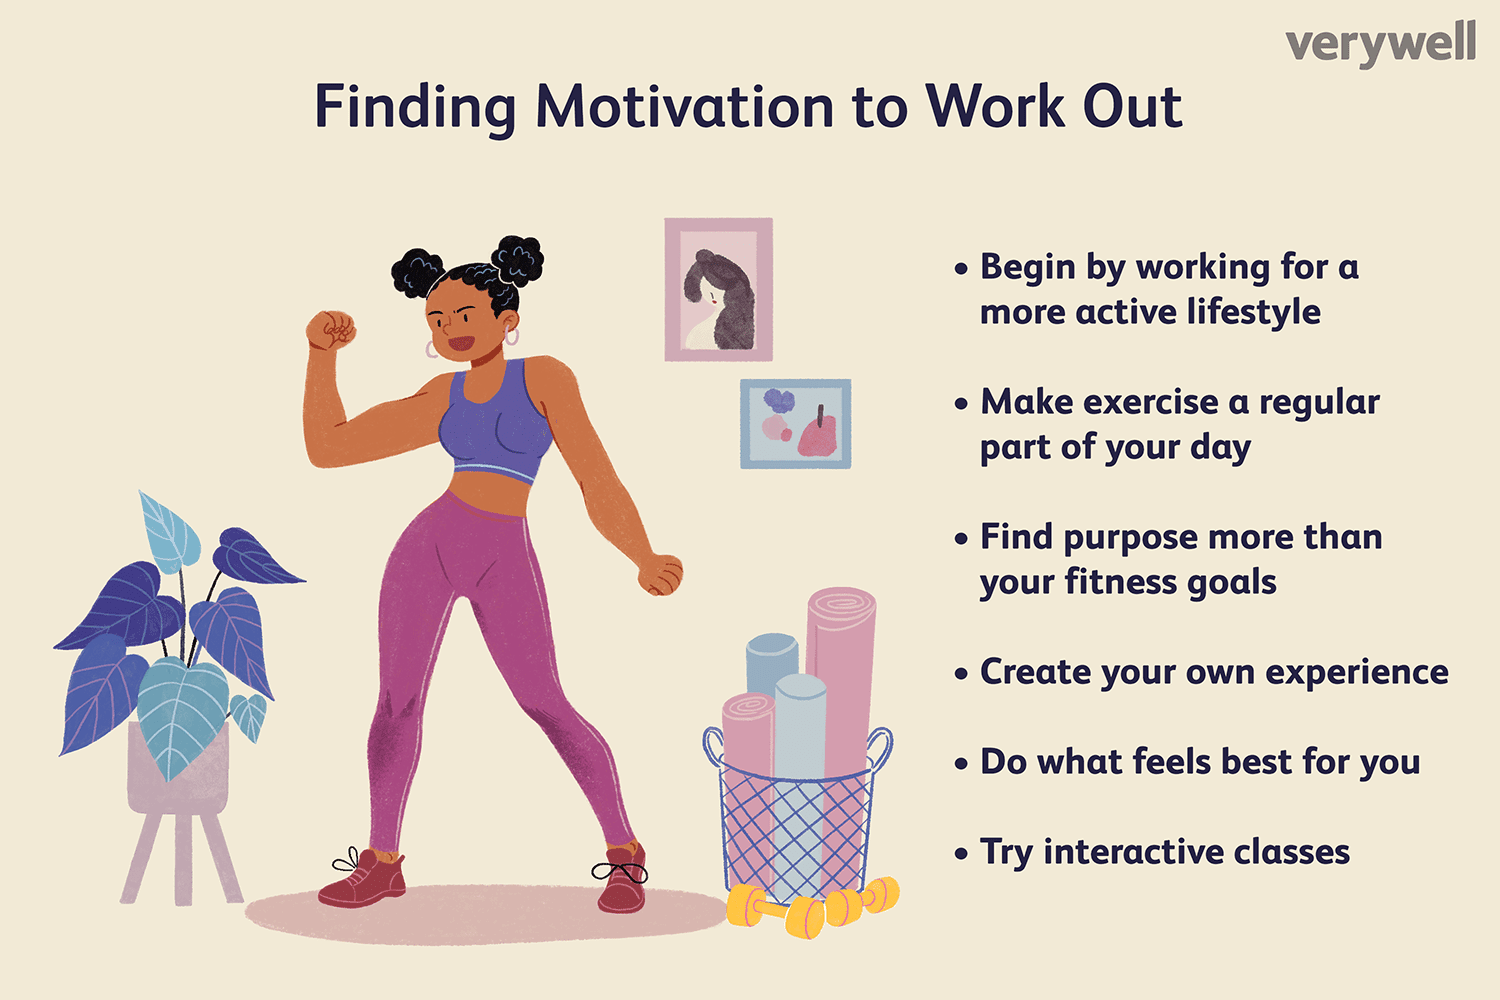 How to find motivation to work out